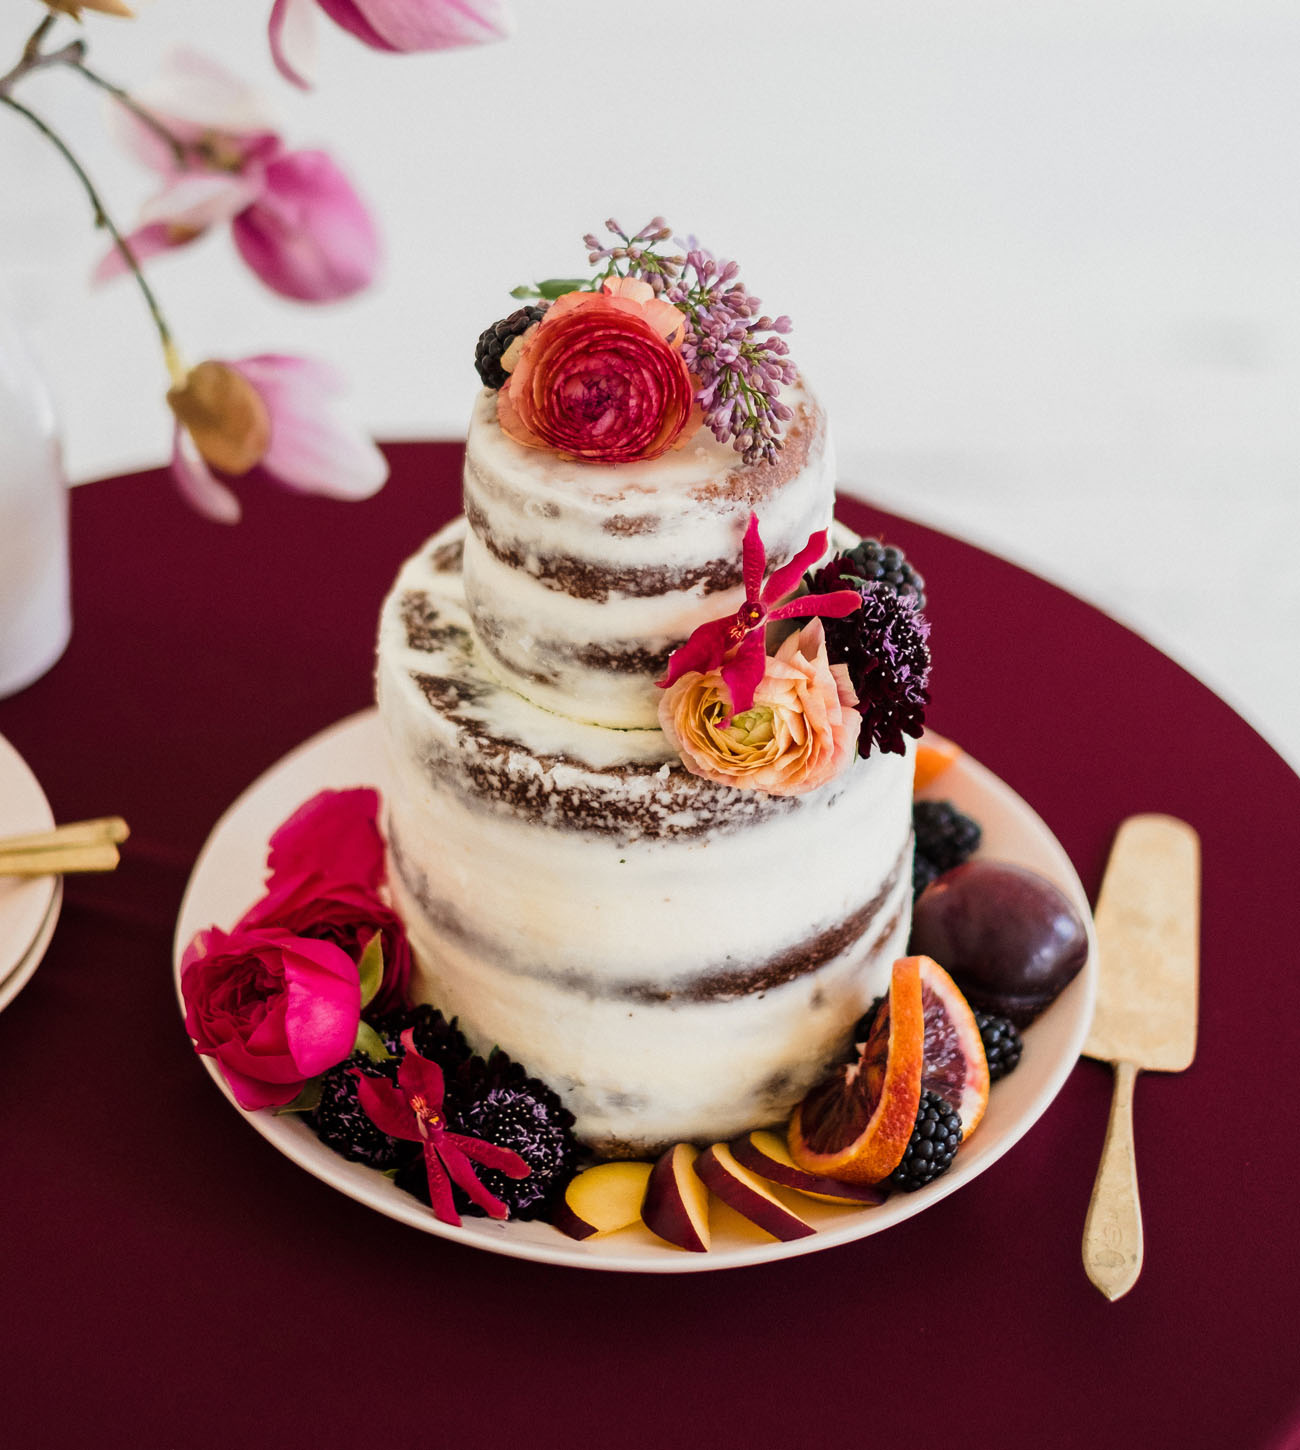 The wedding cake was a naked one, with fresh blooms and fruits that were bold touches